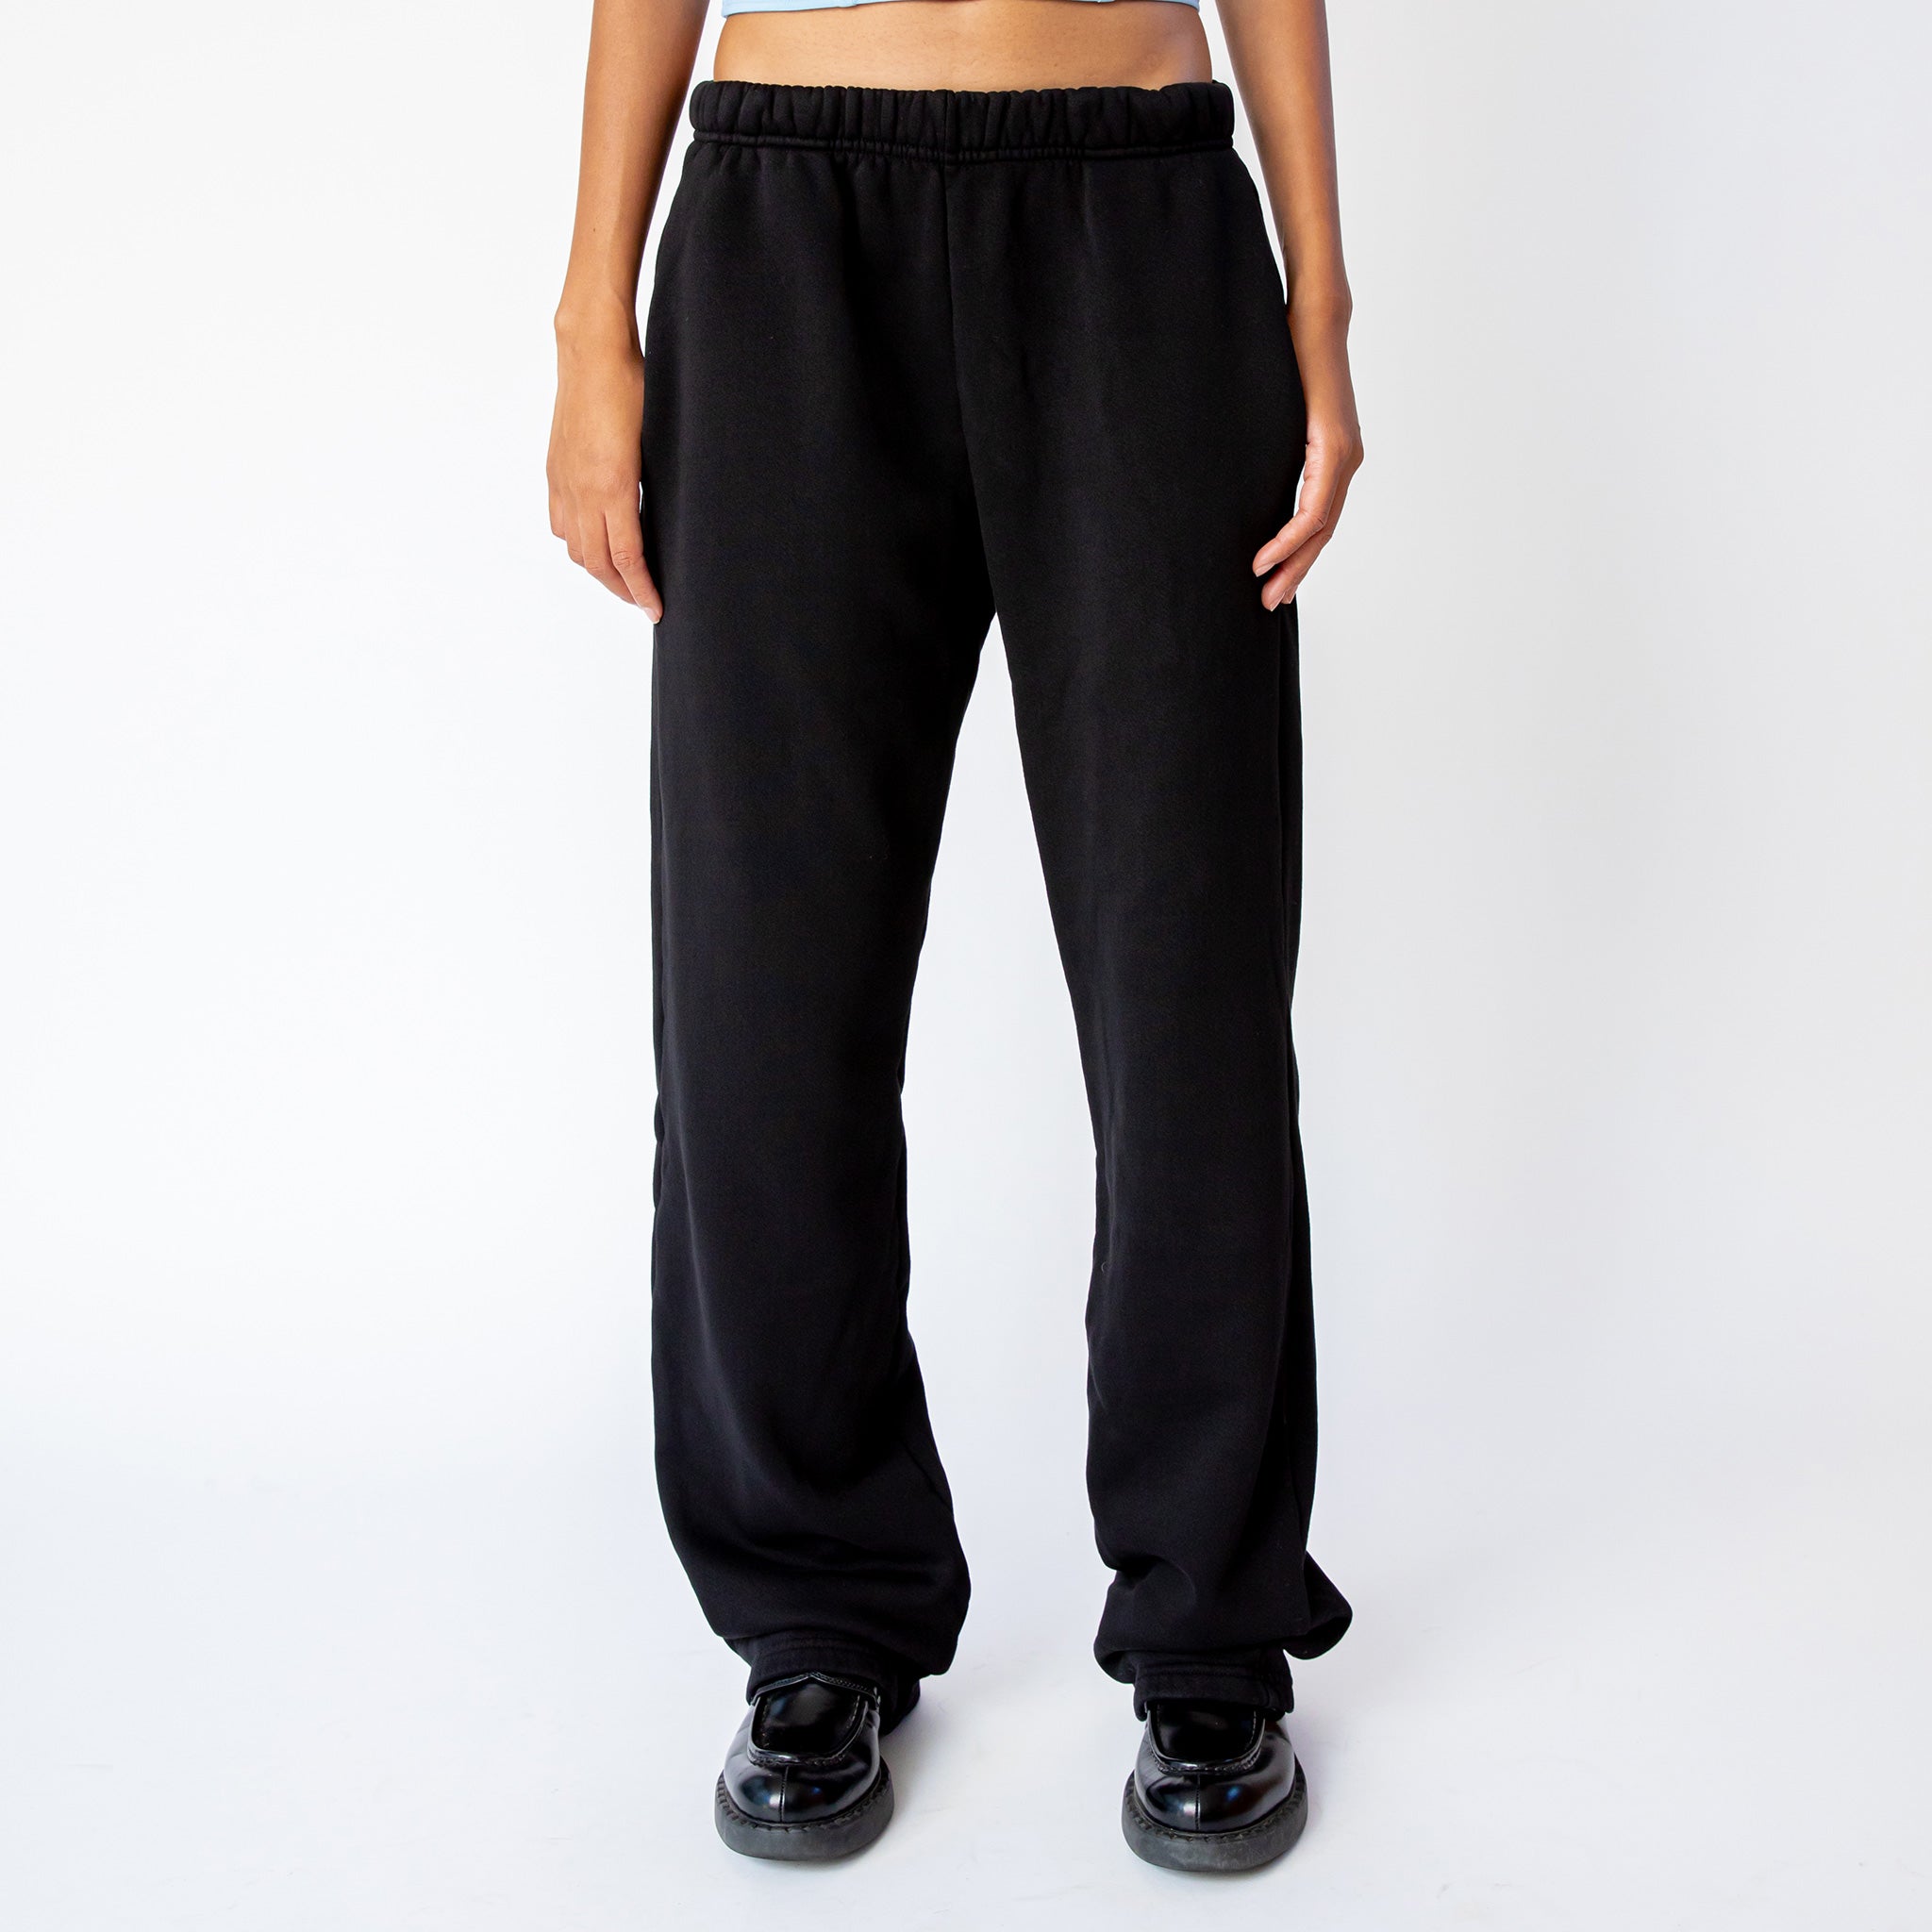 A model wears the Les Tien Puddle Pant in Jet Black, a long, straight-legged sweatpant with extra length that puddles at the feet - front view.